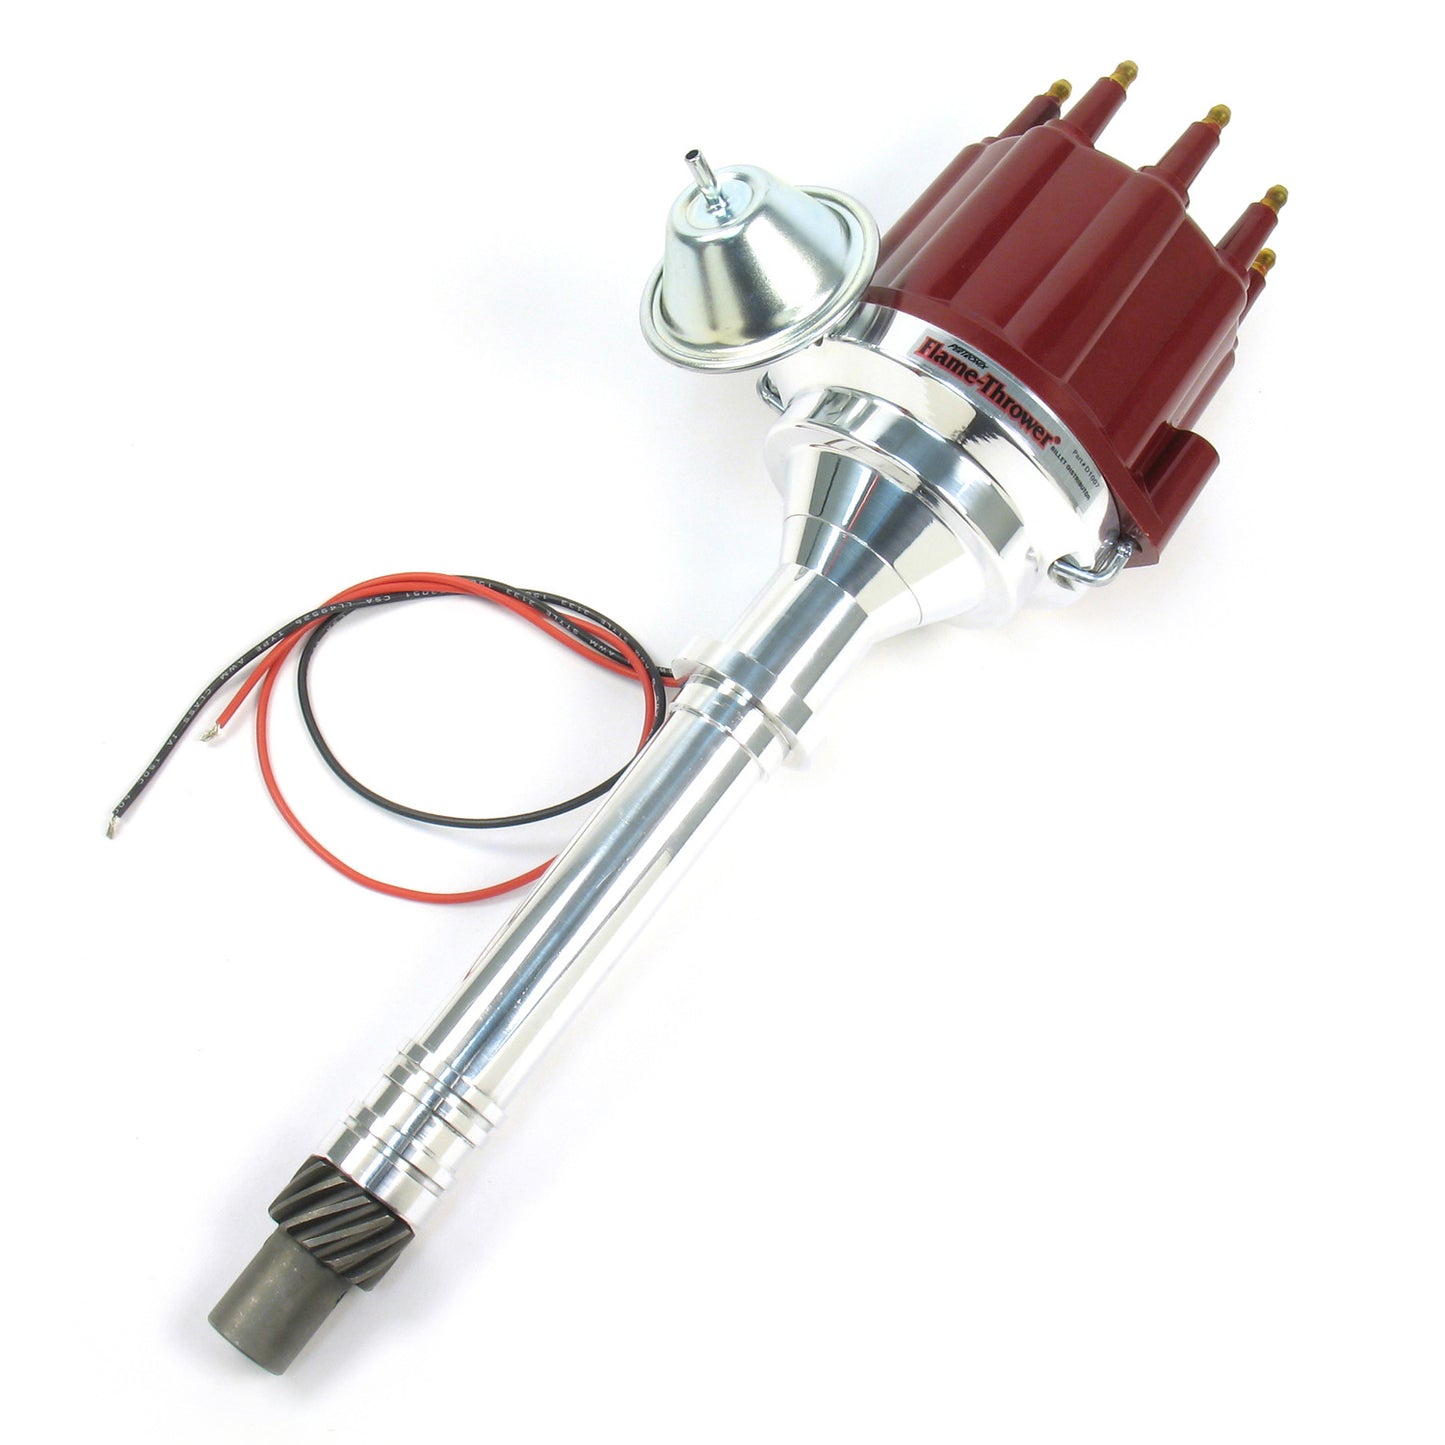 PerTronix D100711 Flame-Thrower Electronic Distributor Billet Chevrolet Small Block/Big Block Plug and Play with Ignitor II Technology Vacuum Advance Red Male Cap